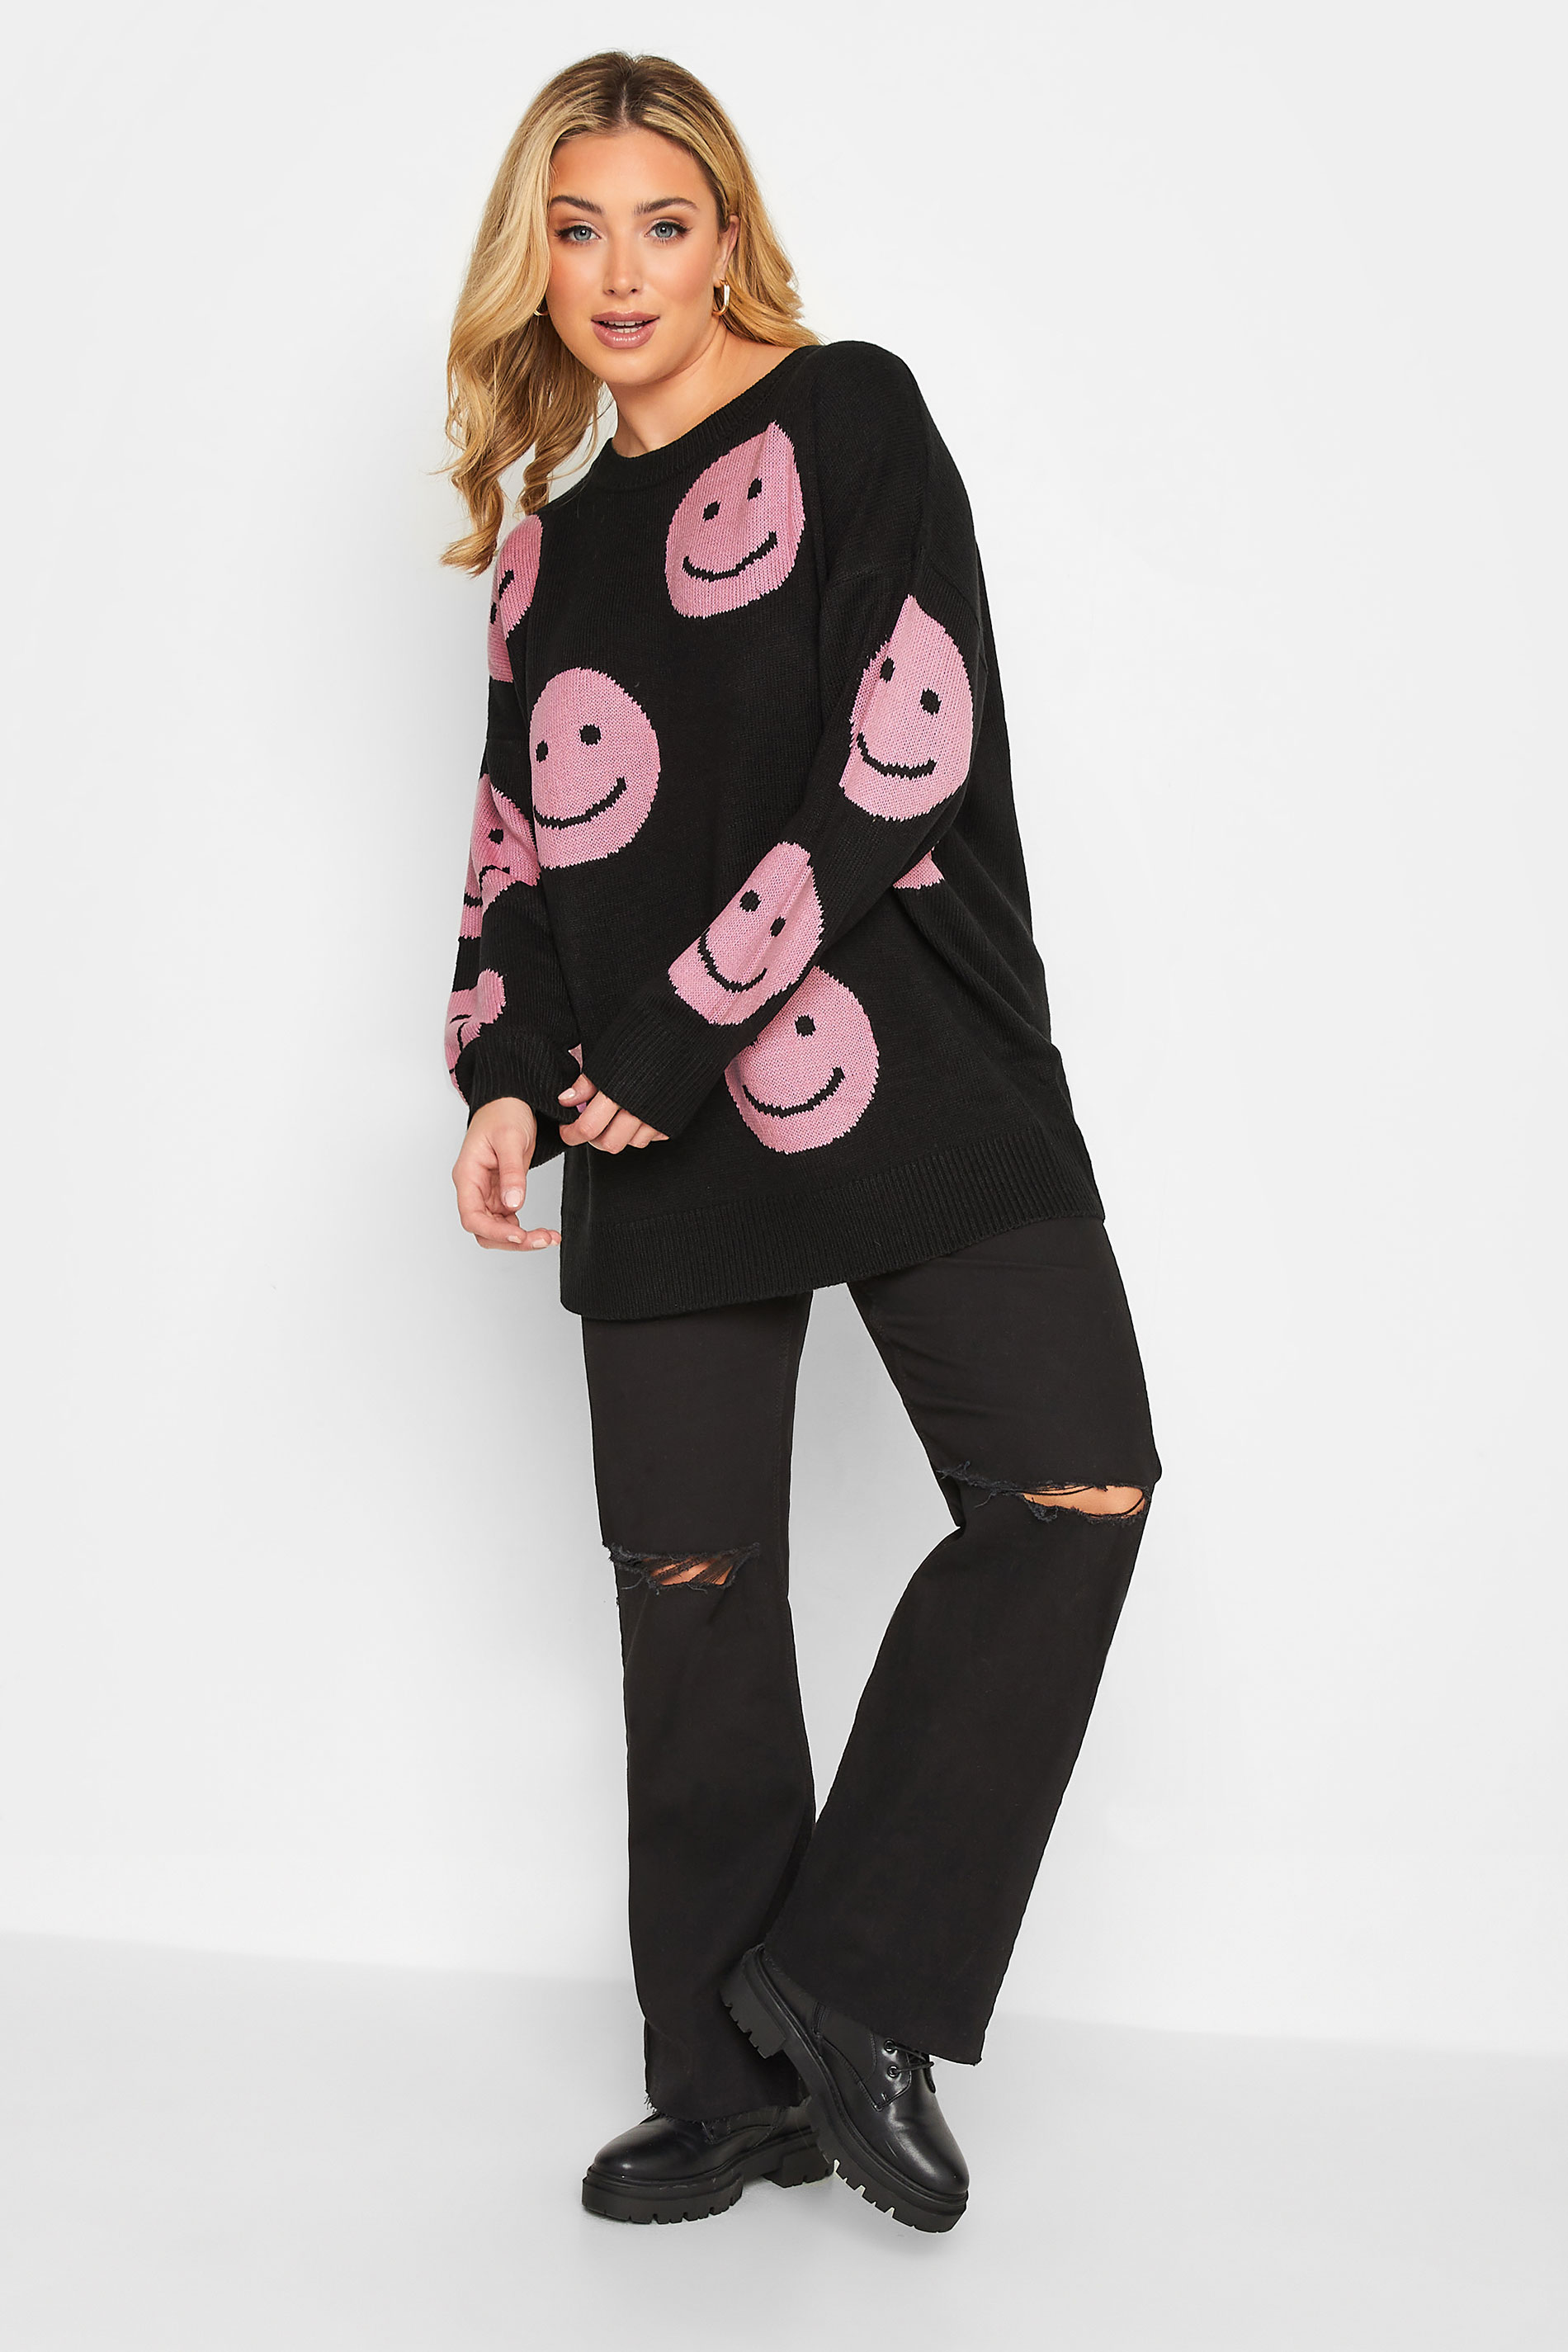 Plus Size Black Smile Jacquard Knitted Jumper | Yours Clothing 2